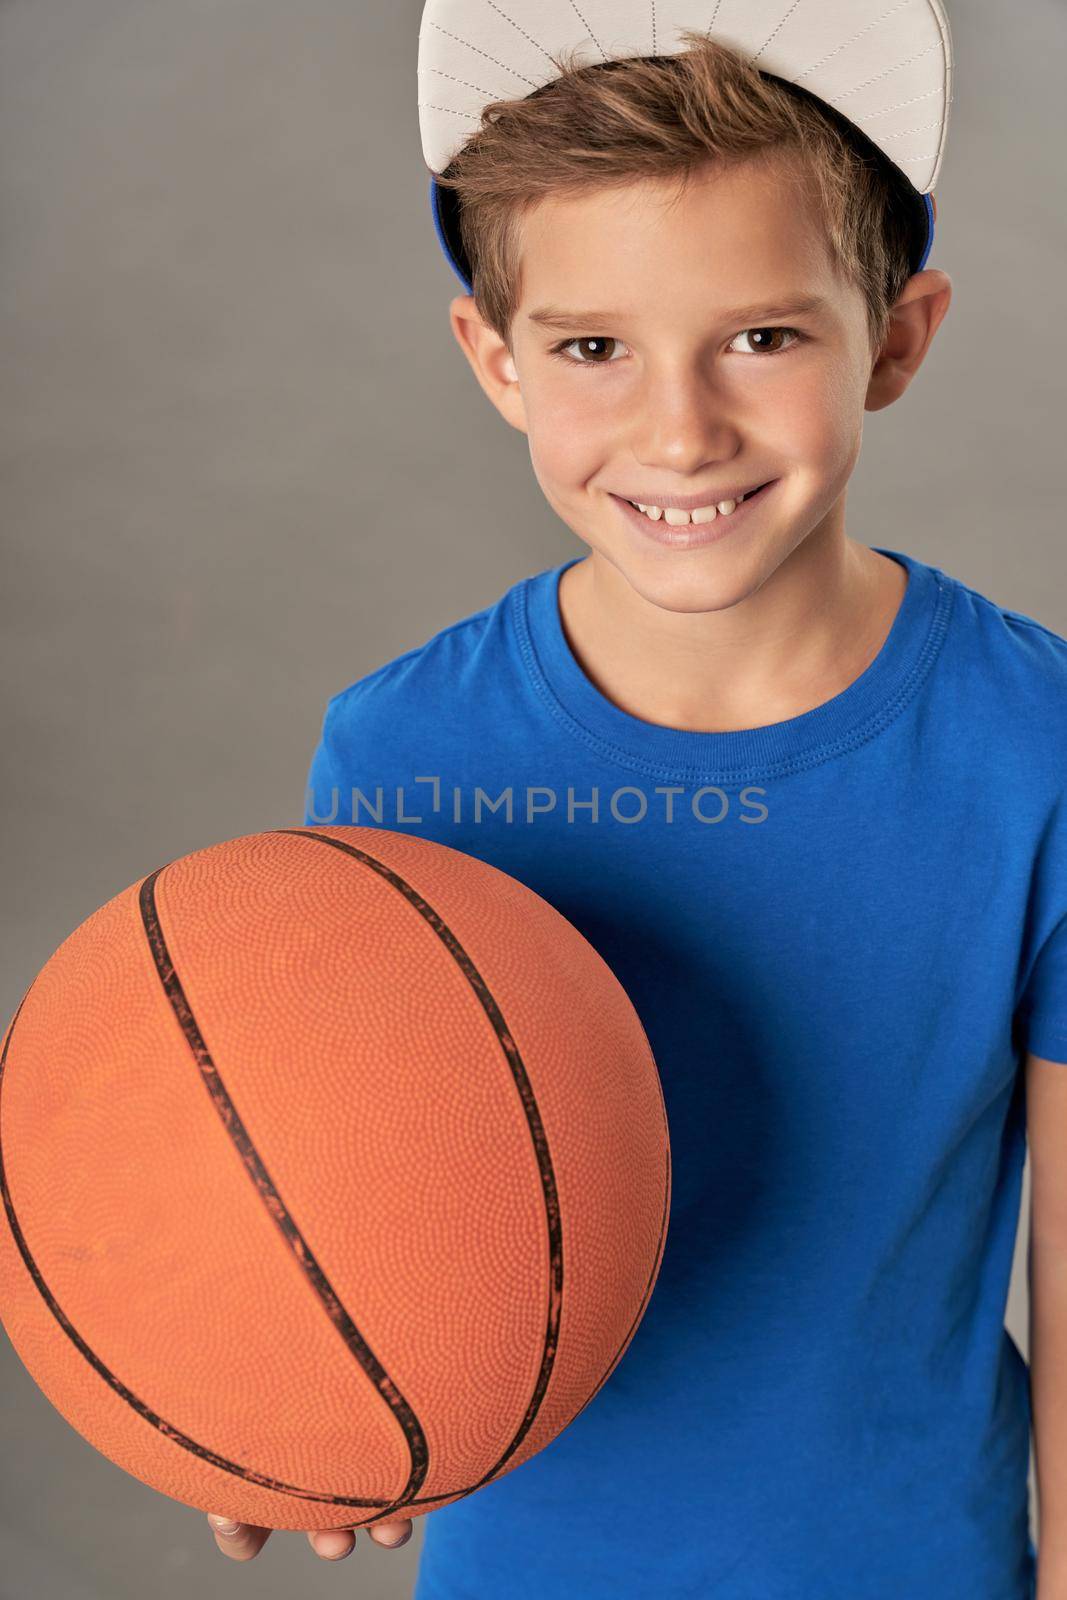 Adorable boy basketball player holding game ball and smiling while standing against gray background